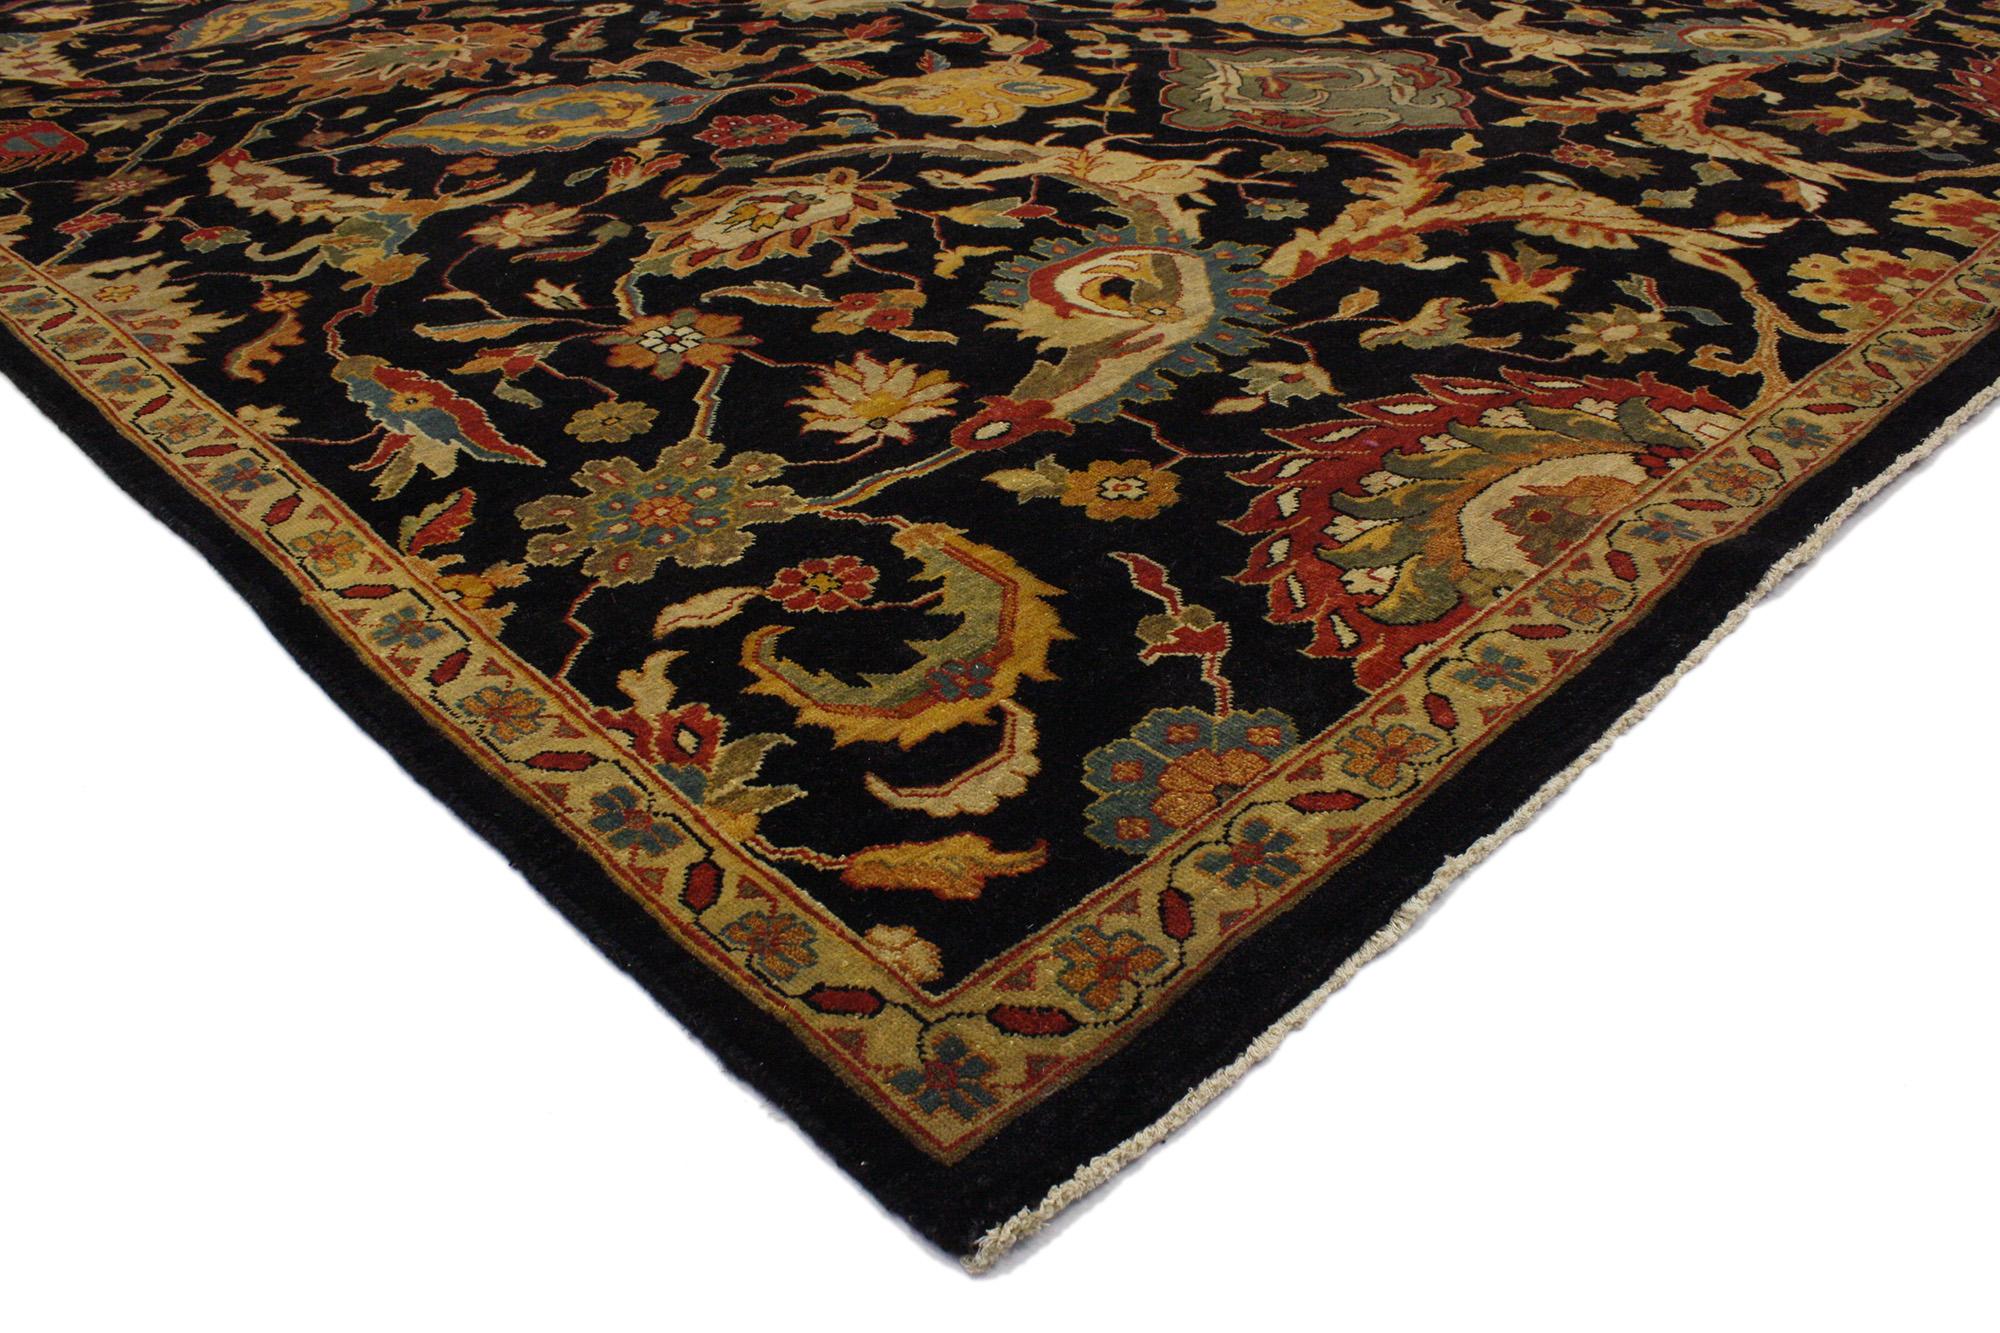 30173 Modern Black Indian Mahal Rug, 08’09 x 11’10. Modern Indian Mahal rugs are contemporary interpretations of traditional Persian Mahal rugs, featuring intricate floral and geometric designs with a central medallion and vibrant colors. Skilled